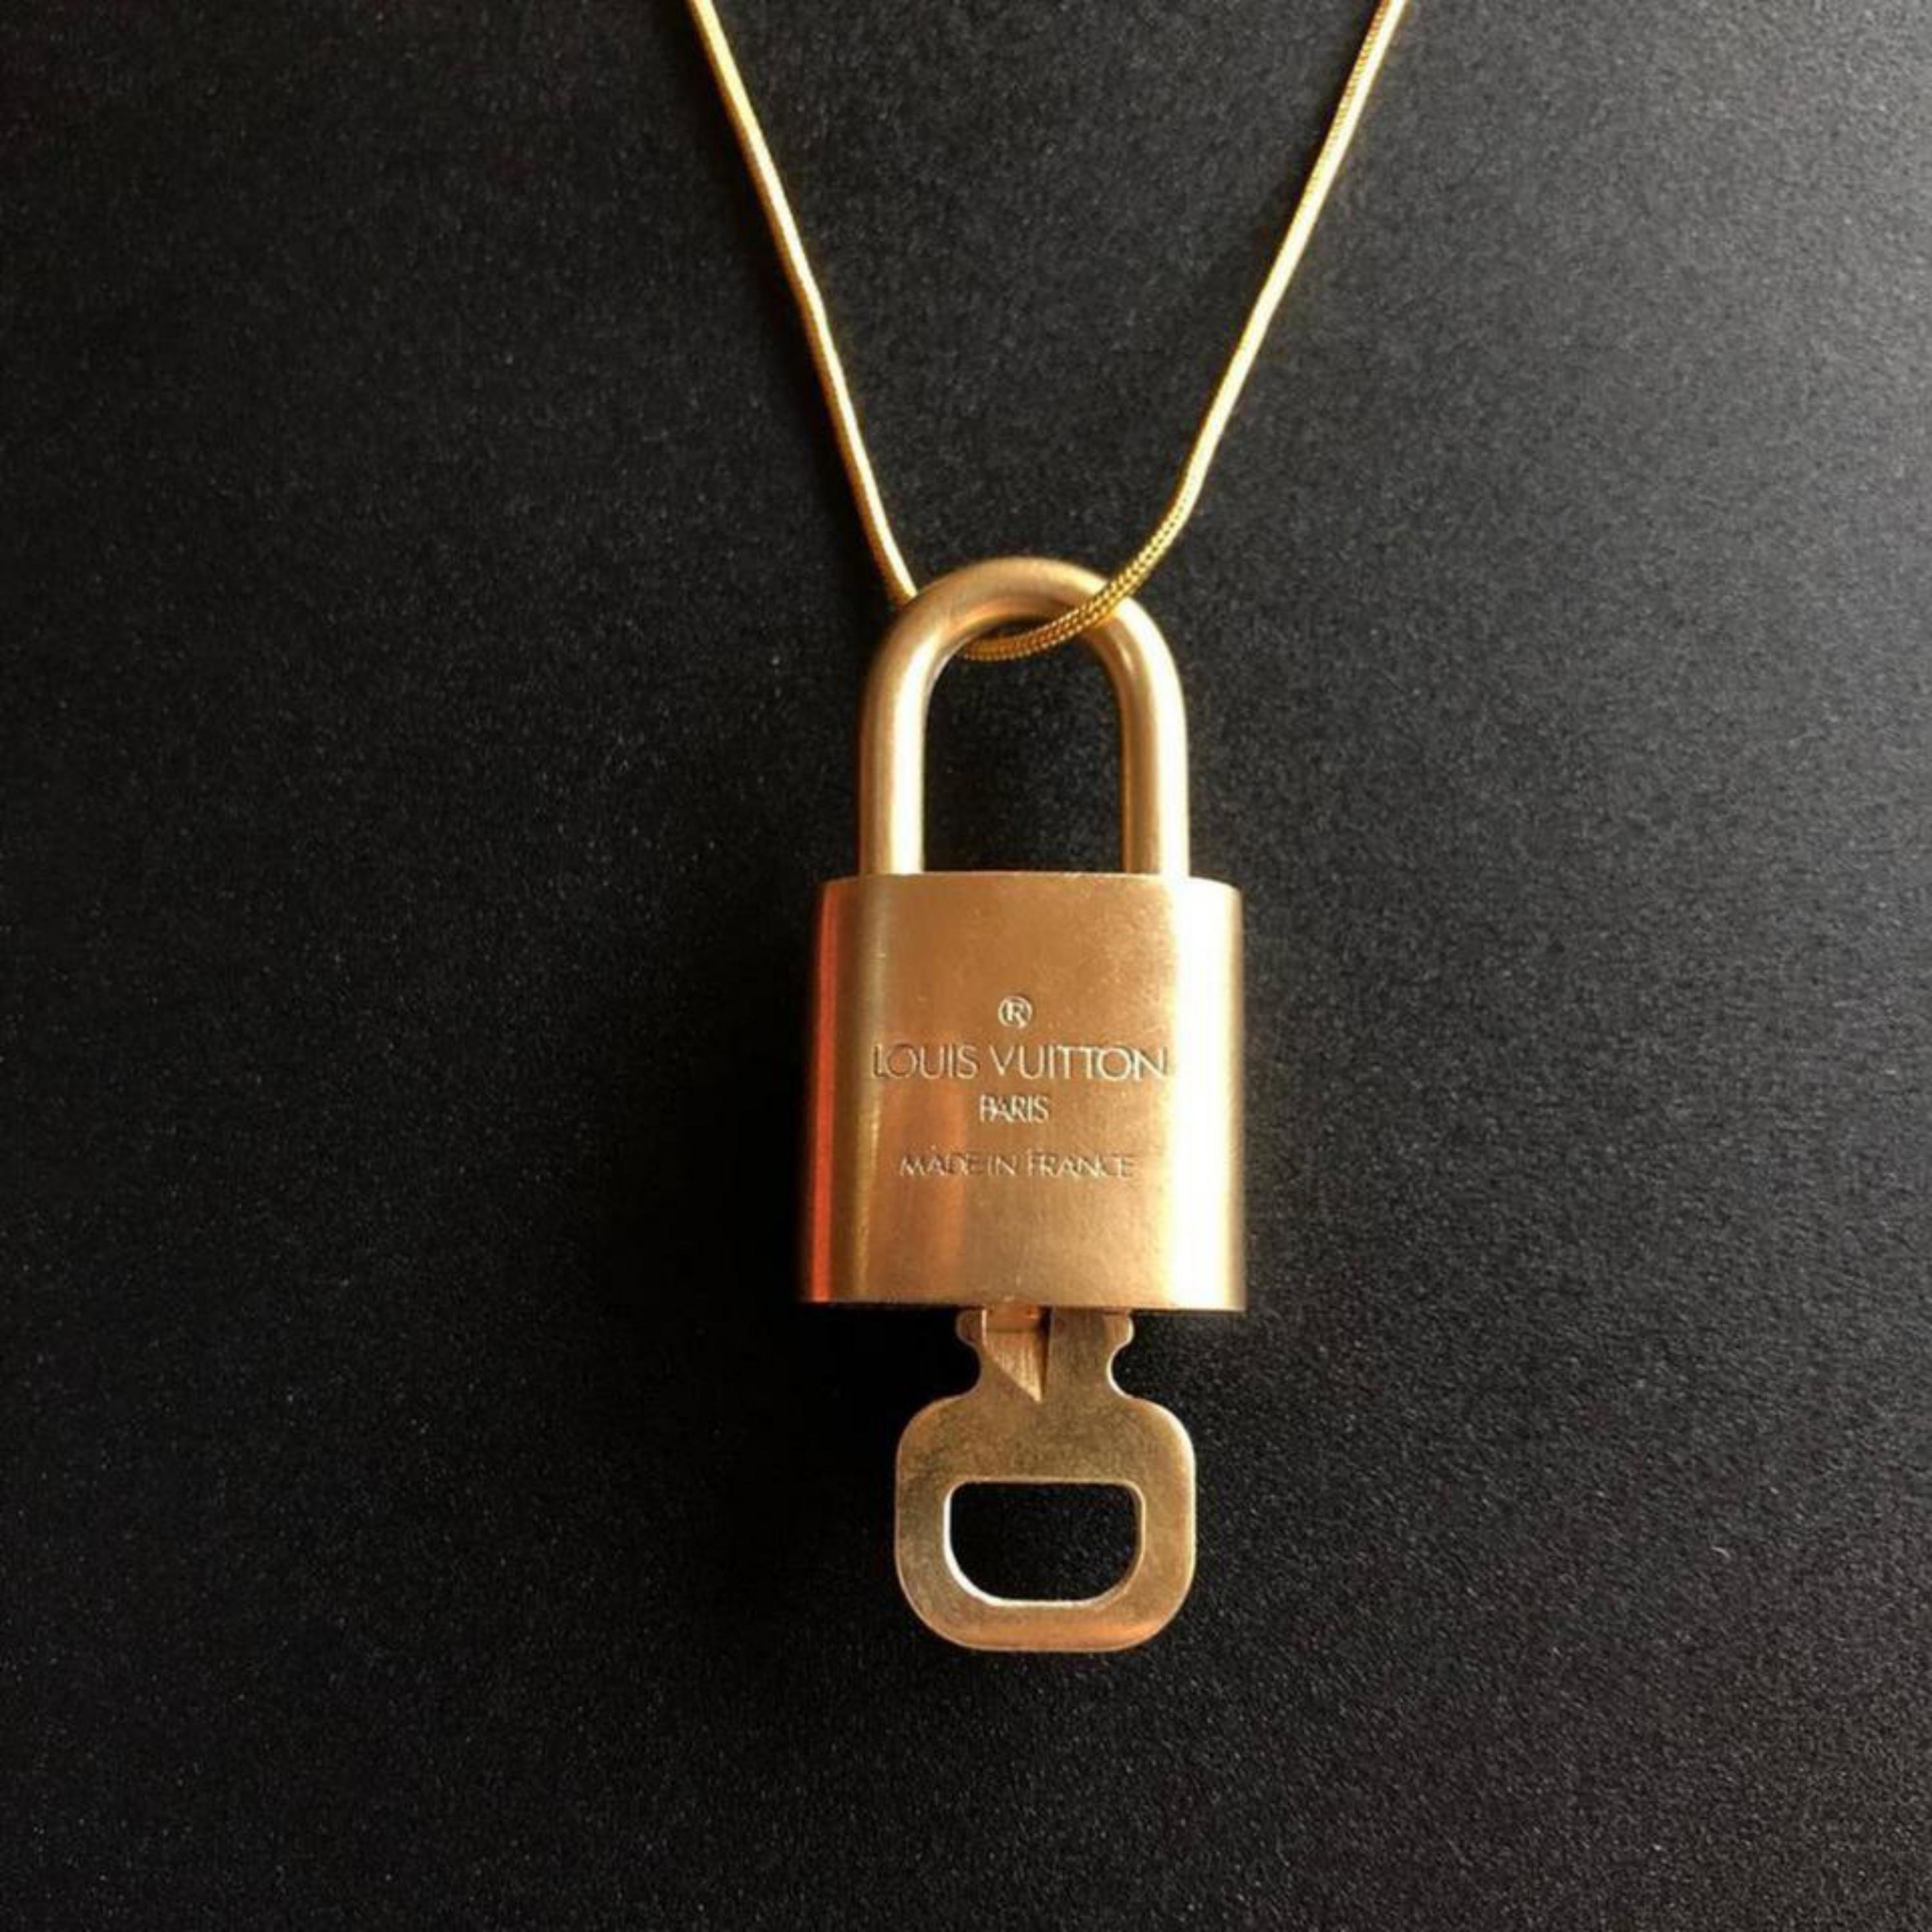 Louis Vuitton Gold Single Key Lock Pad Lock and Key 867698 For Sale 8